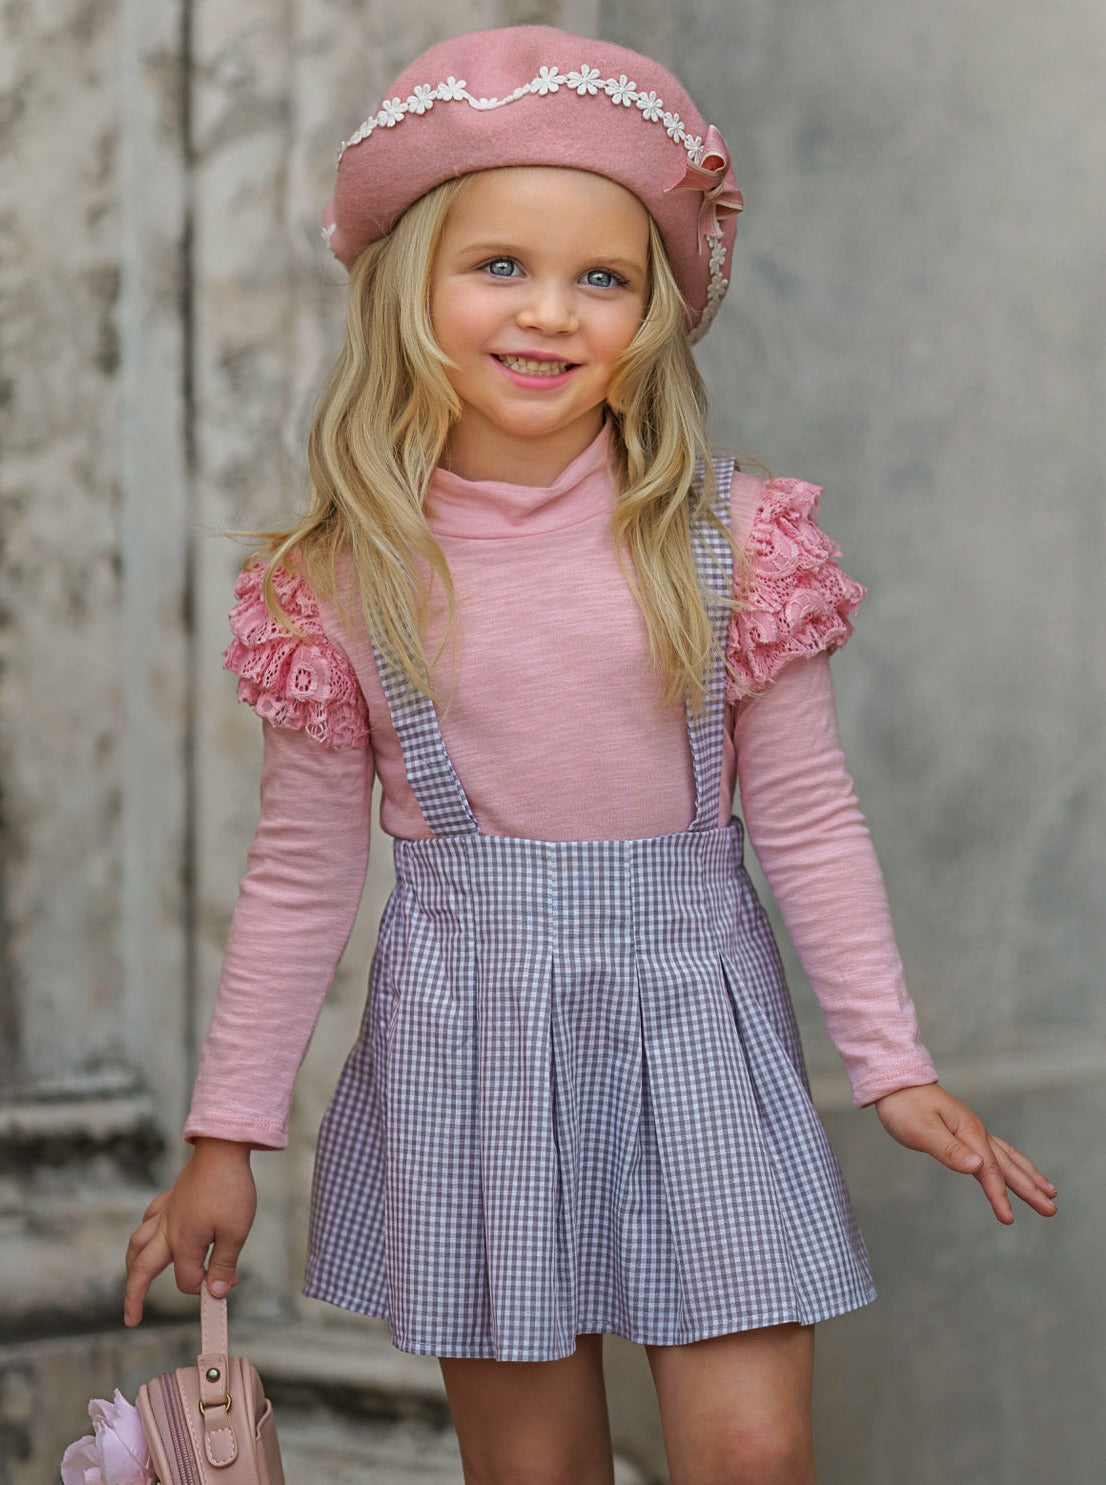 Mia Belle Girls Pink Top & Gingham Suspender Skirt | Toddler Outfits